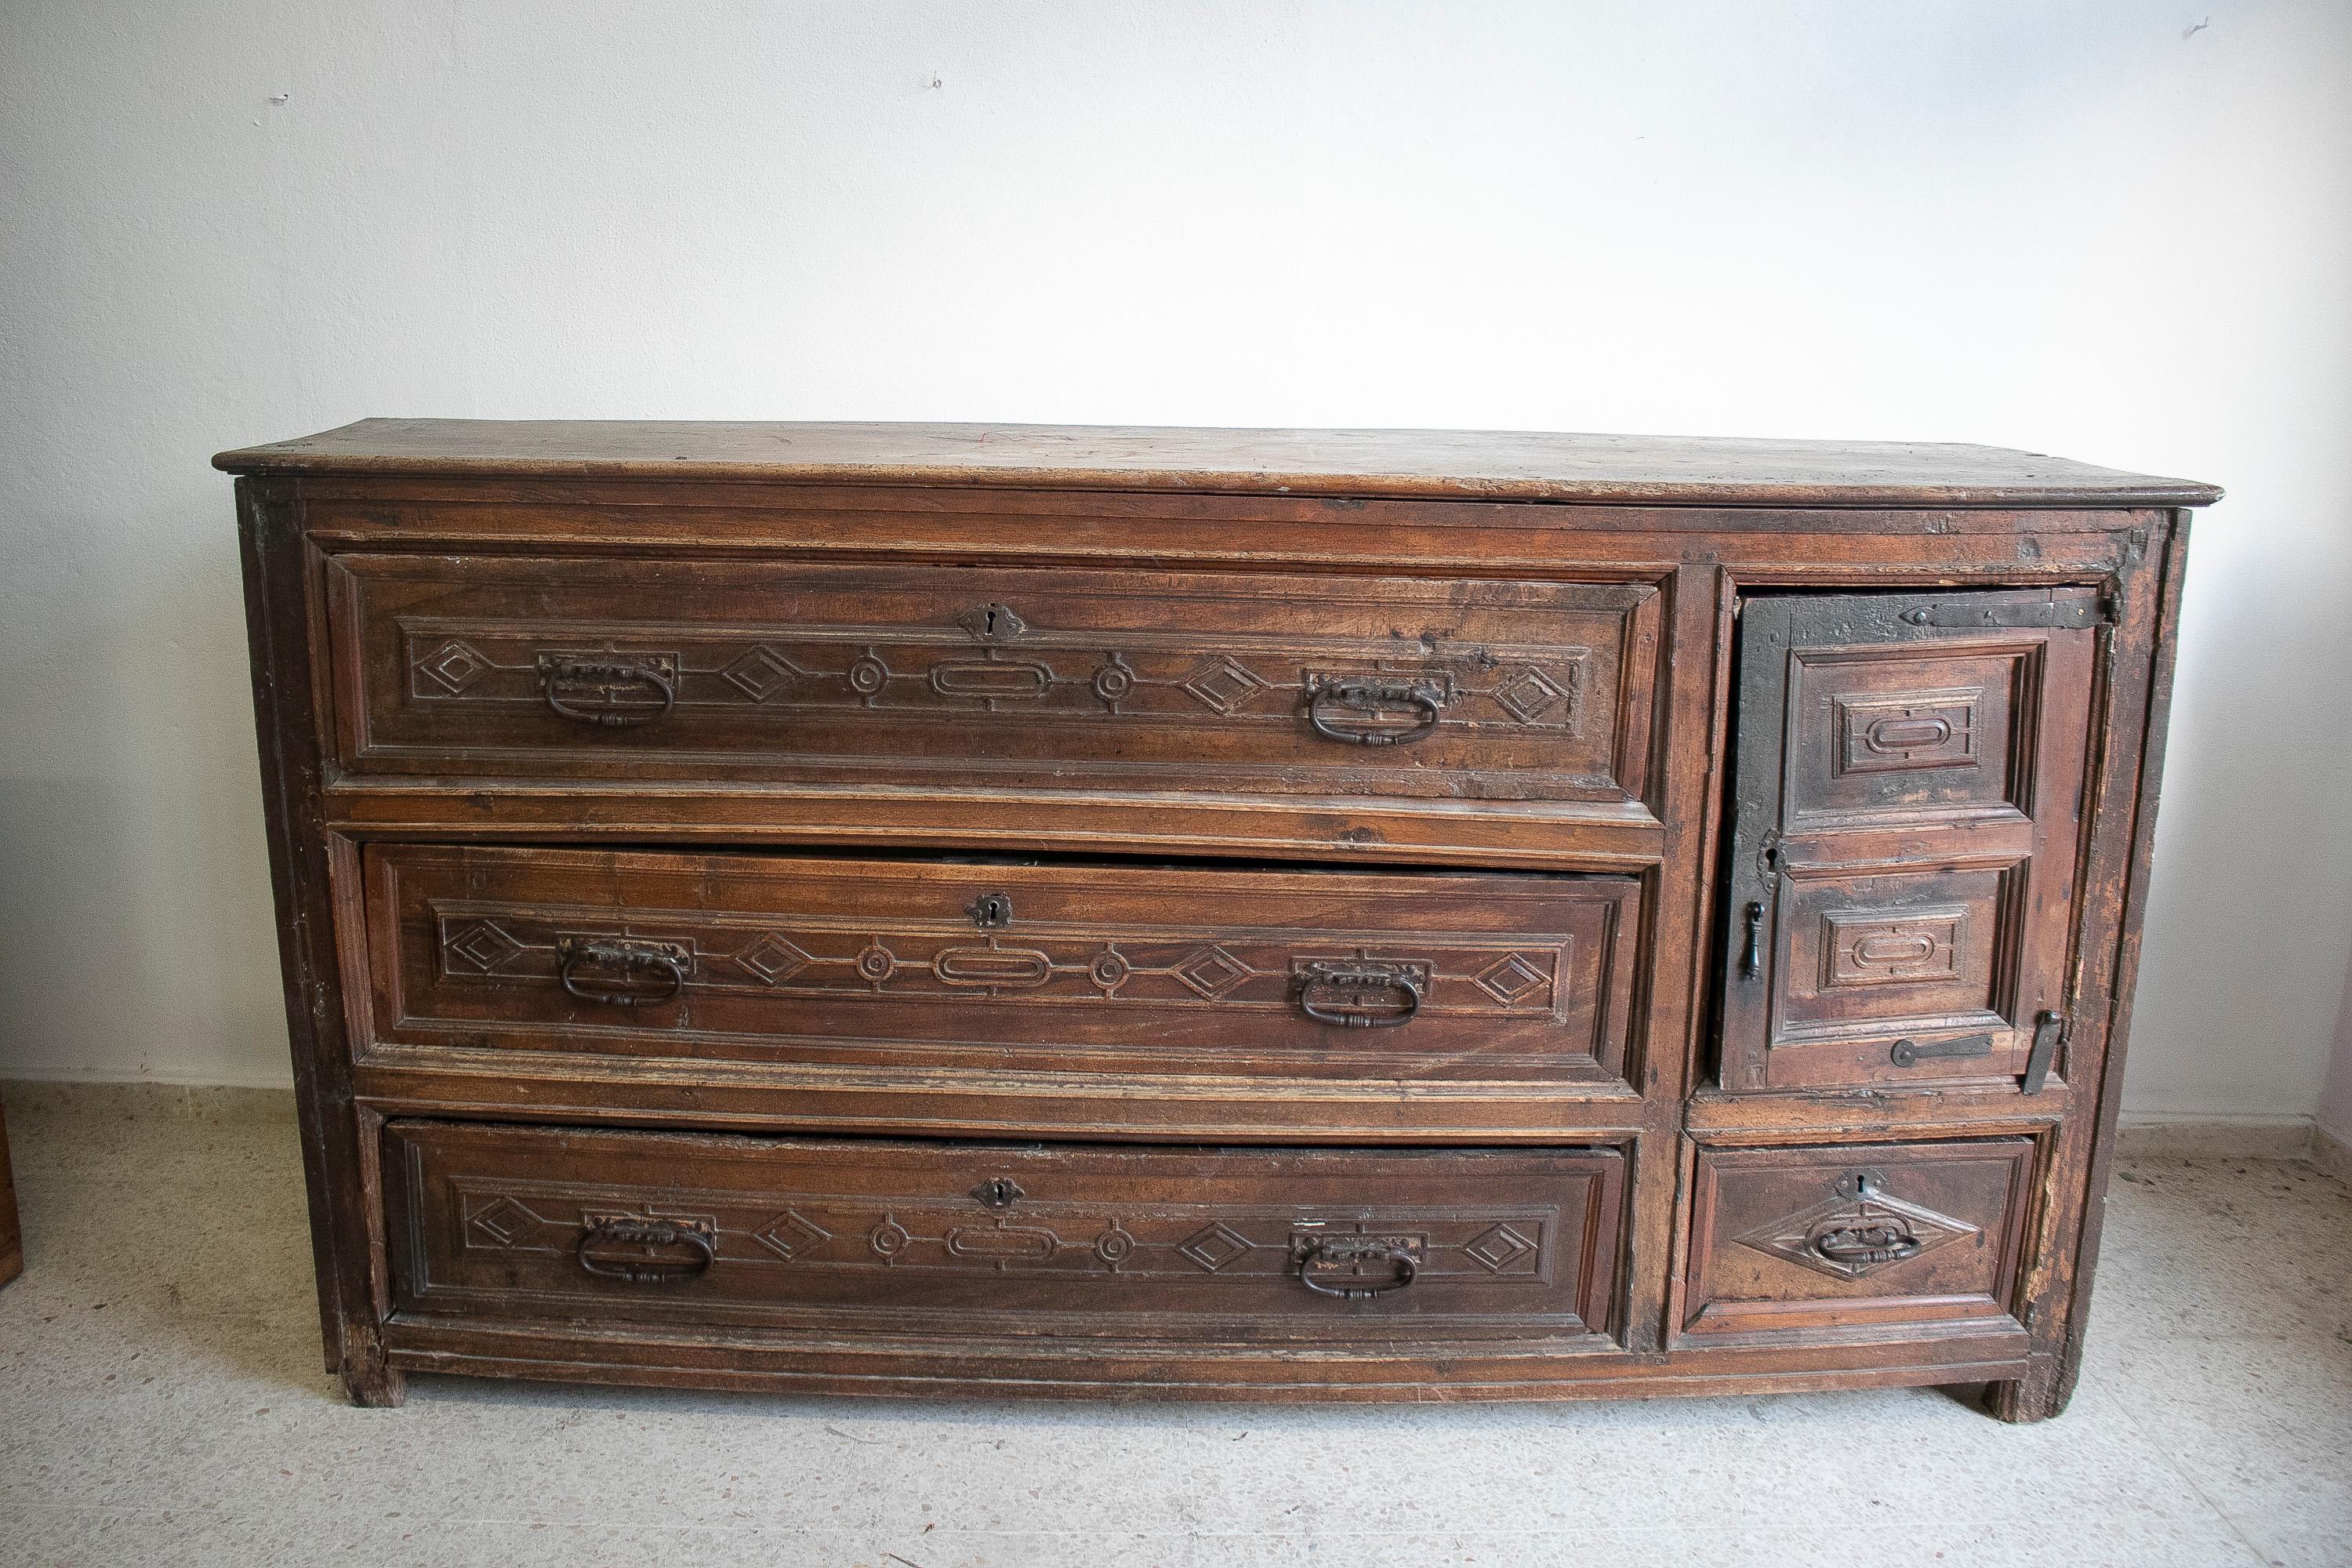 Antique 16th Century English drawer chest with original iron fittings.